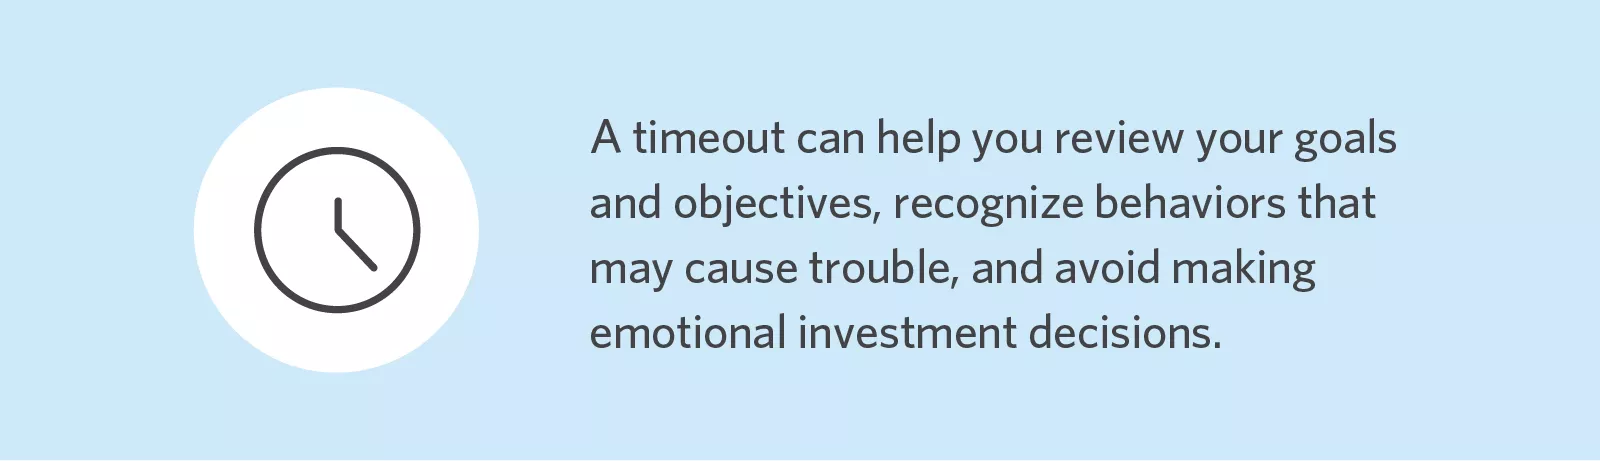  Taking a timeout can help you avoid problematic emotional investment decisions.
